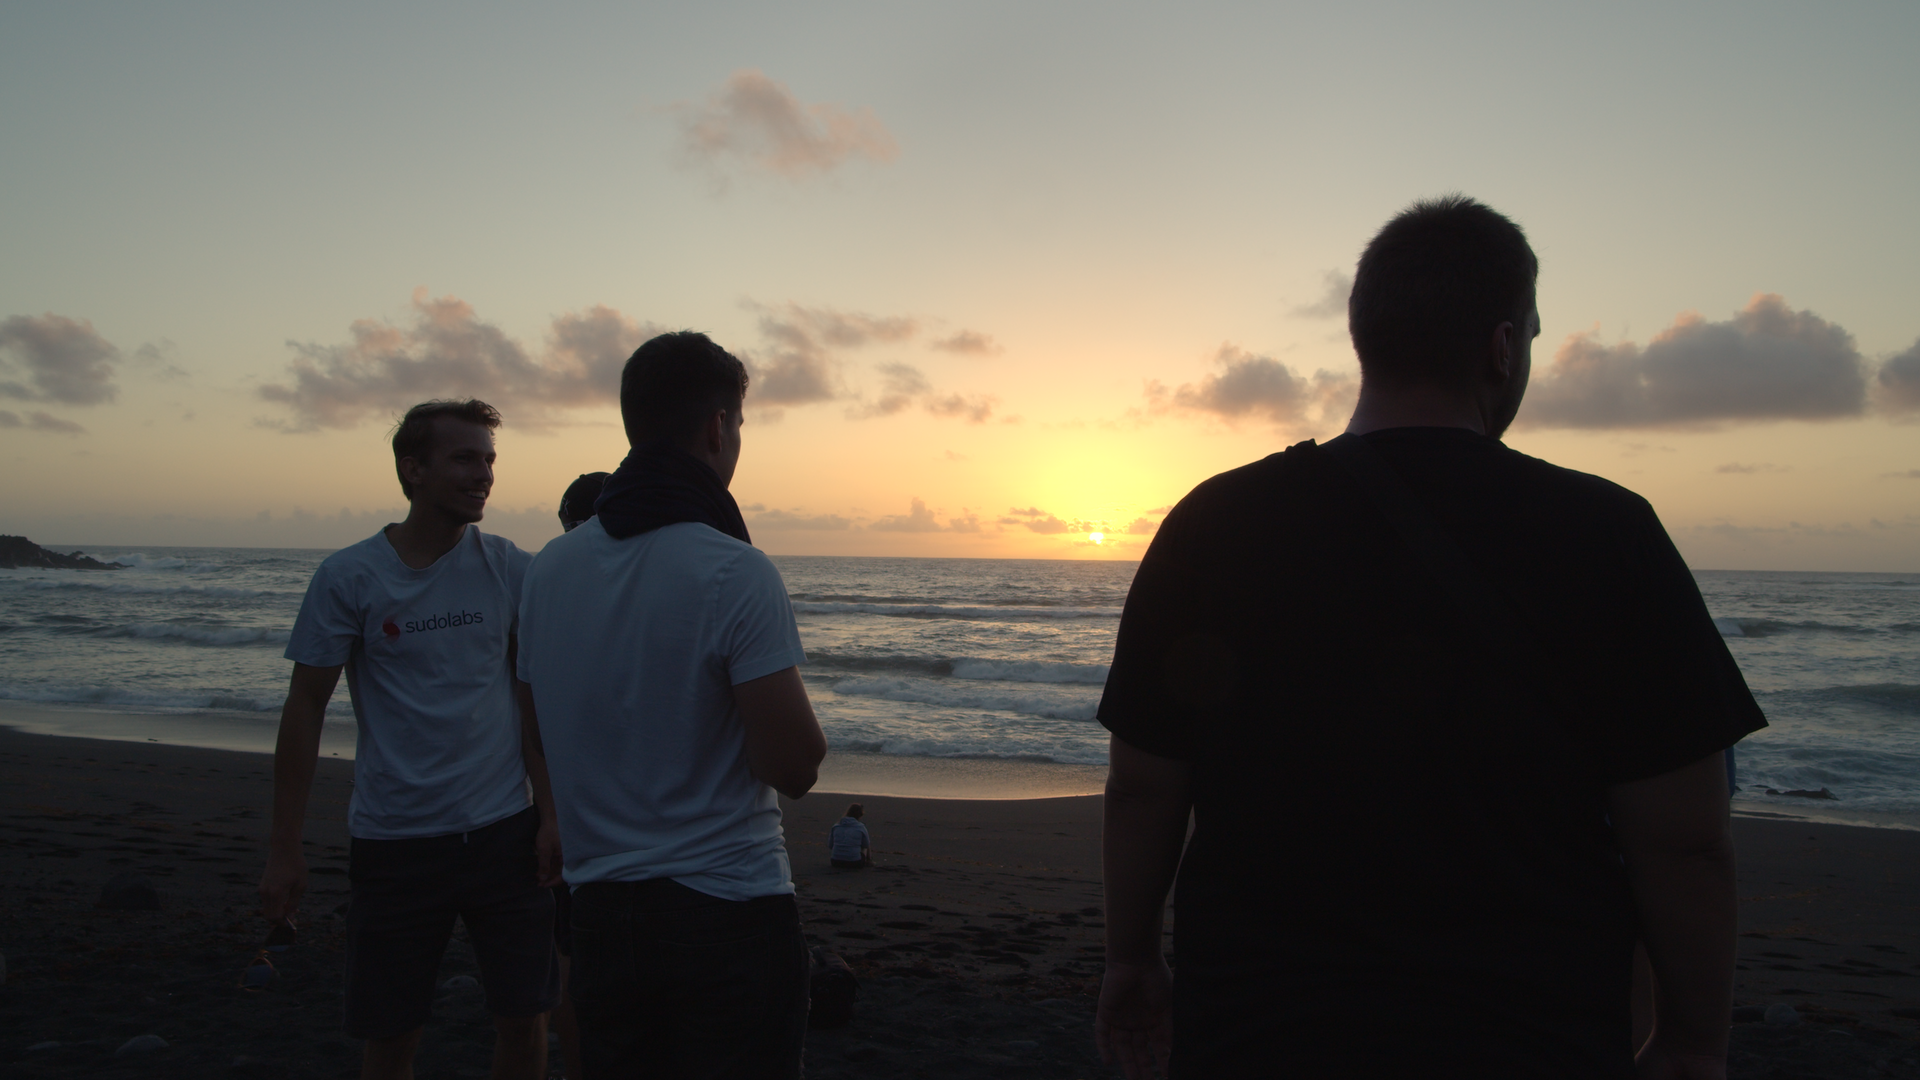 Developers from Sudolabs watching the sunset